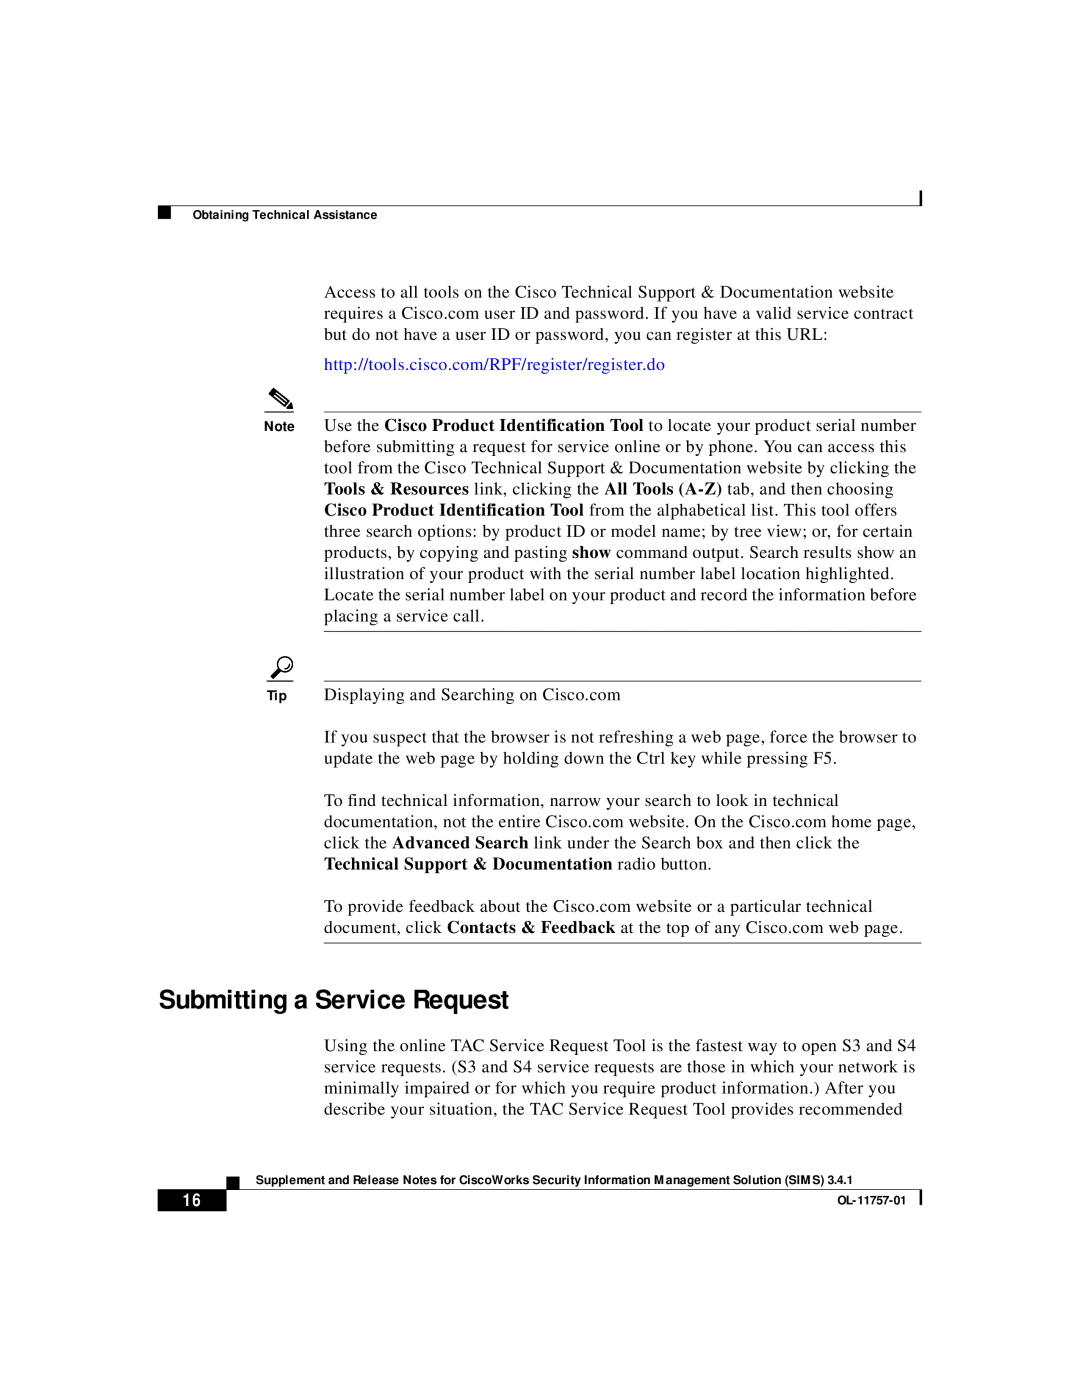 Cisco Systems OL-11757-01 manual Submitting a Service Request 